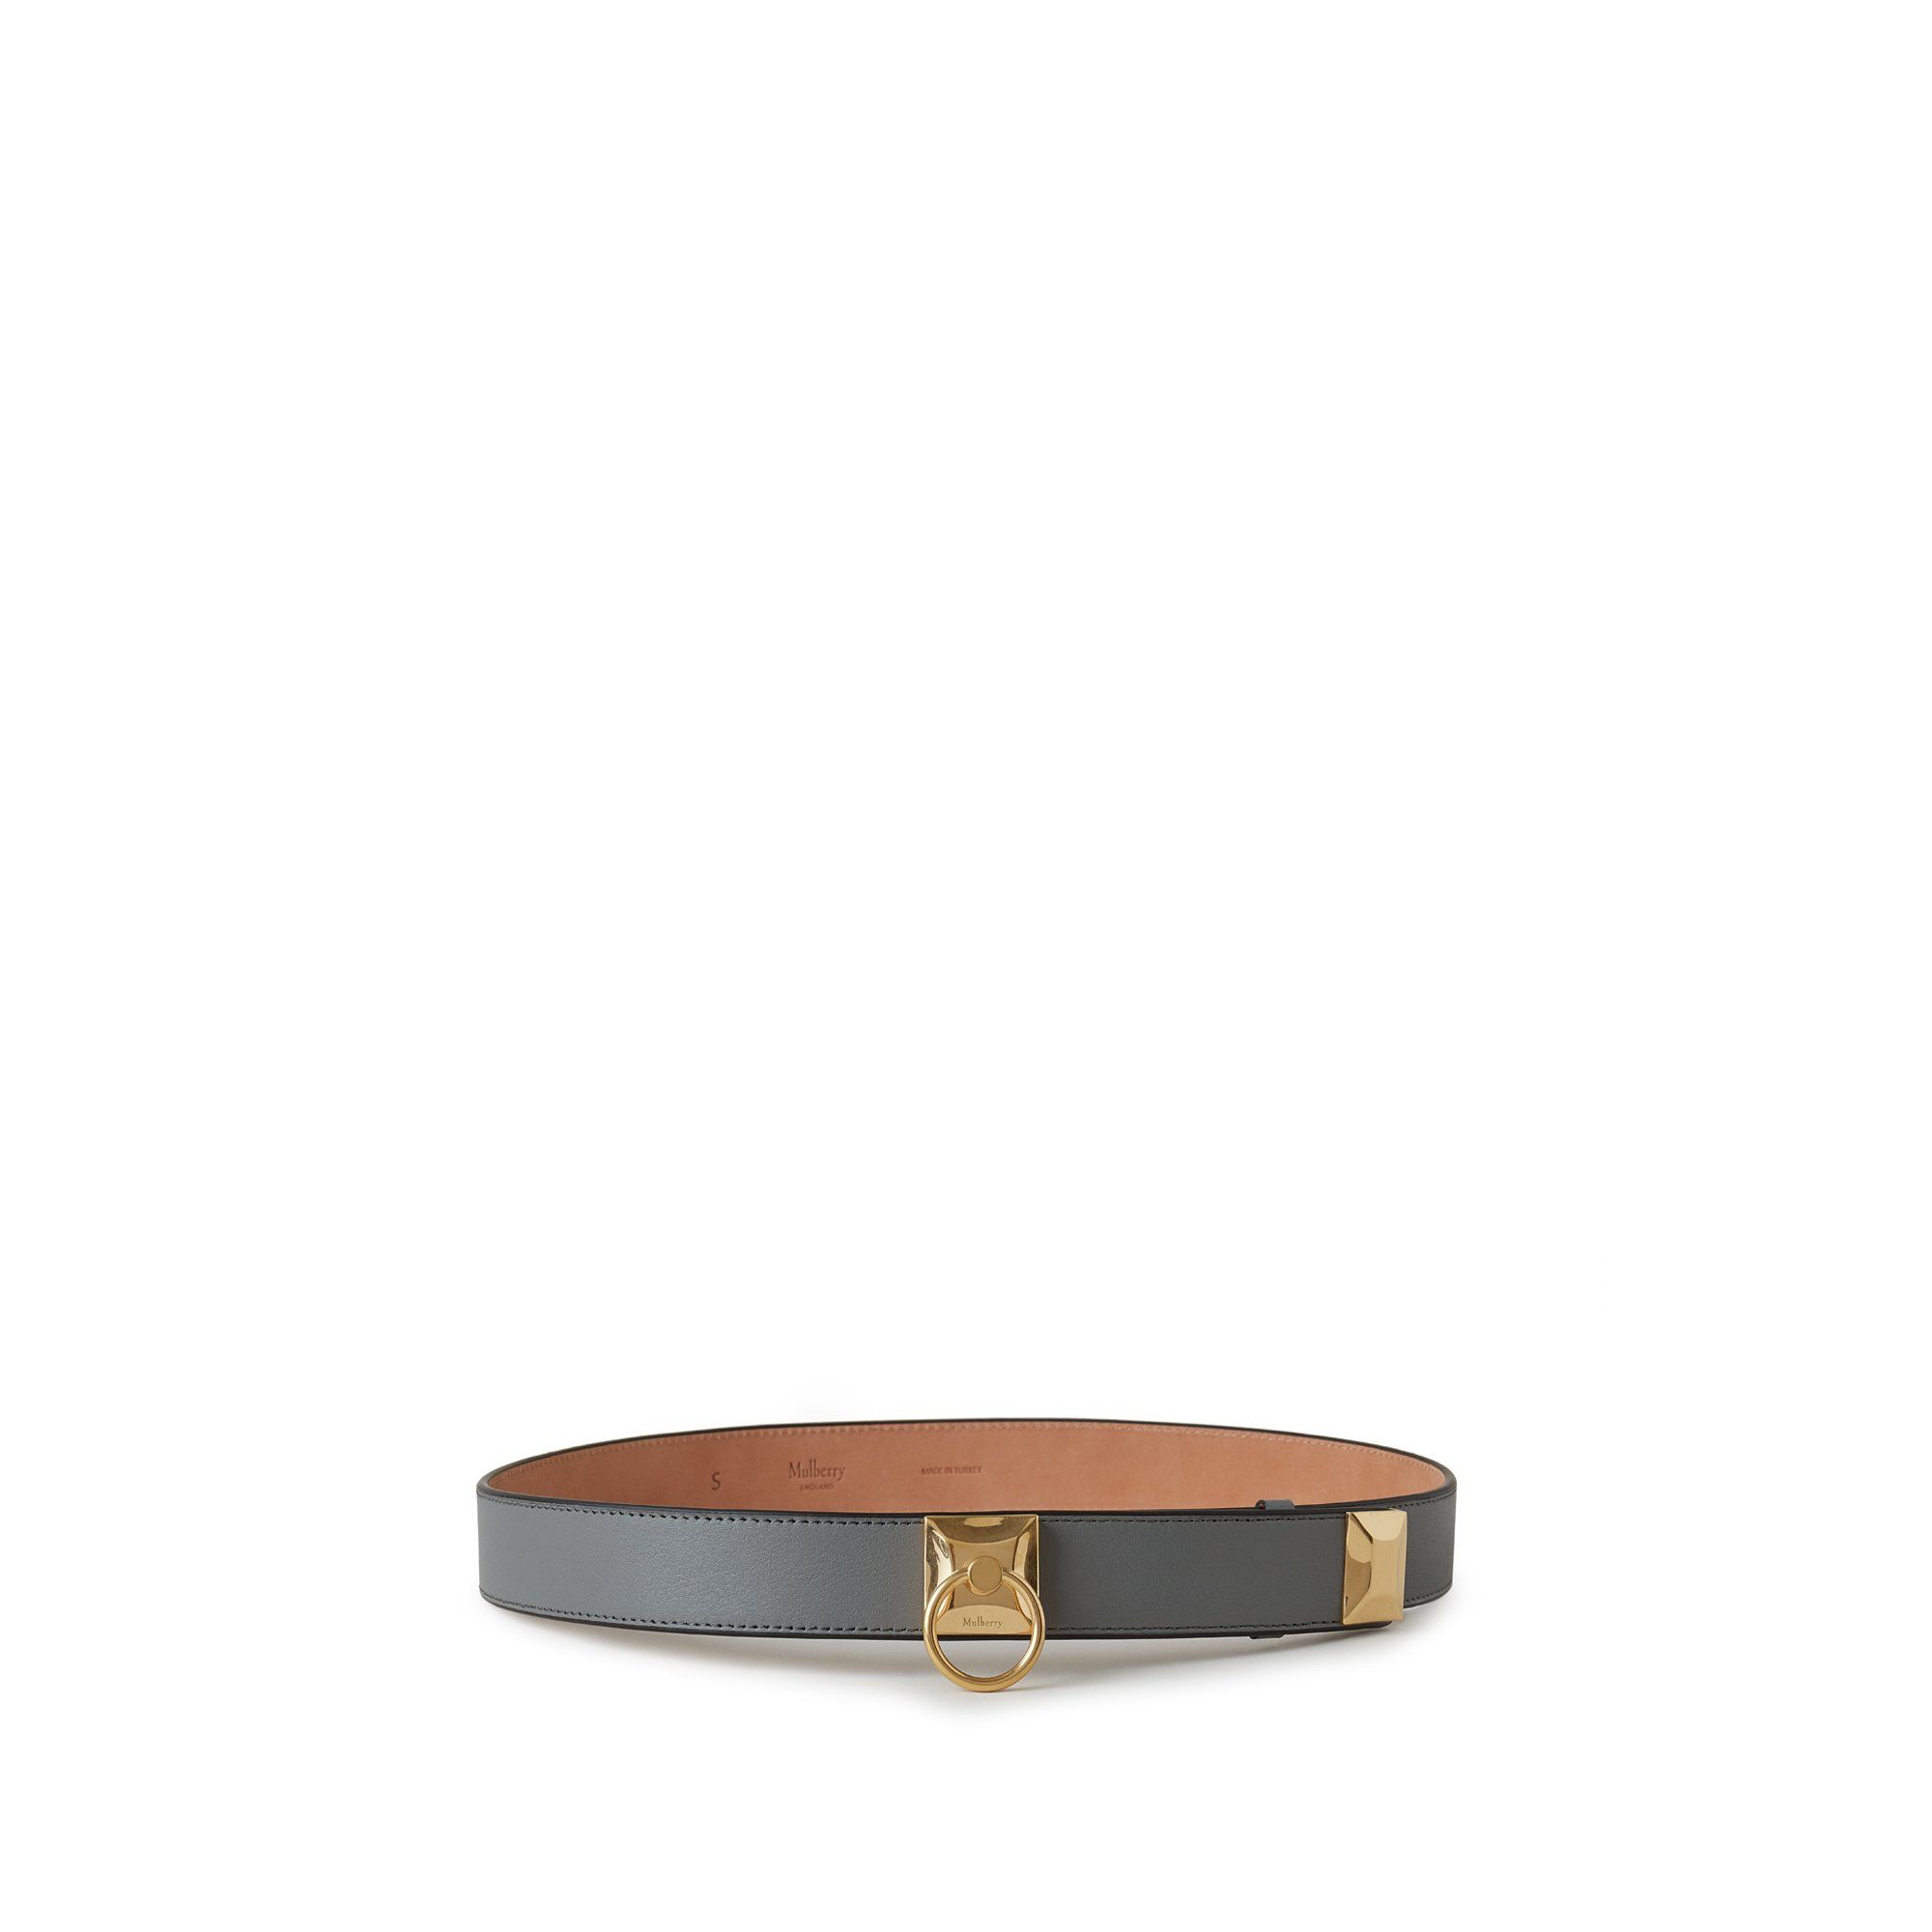 Mulberry Iris Belt In Charcoal